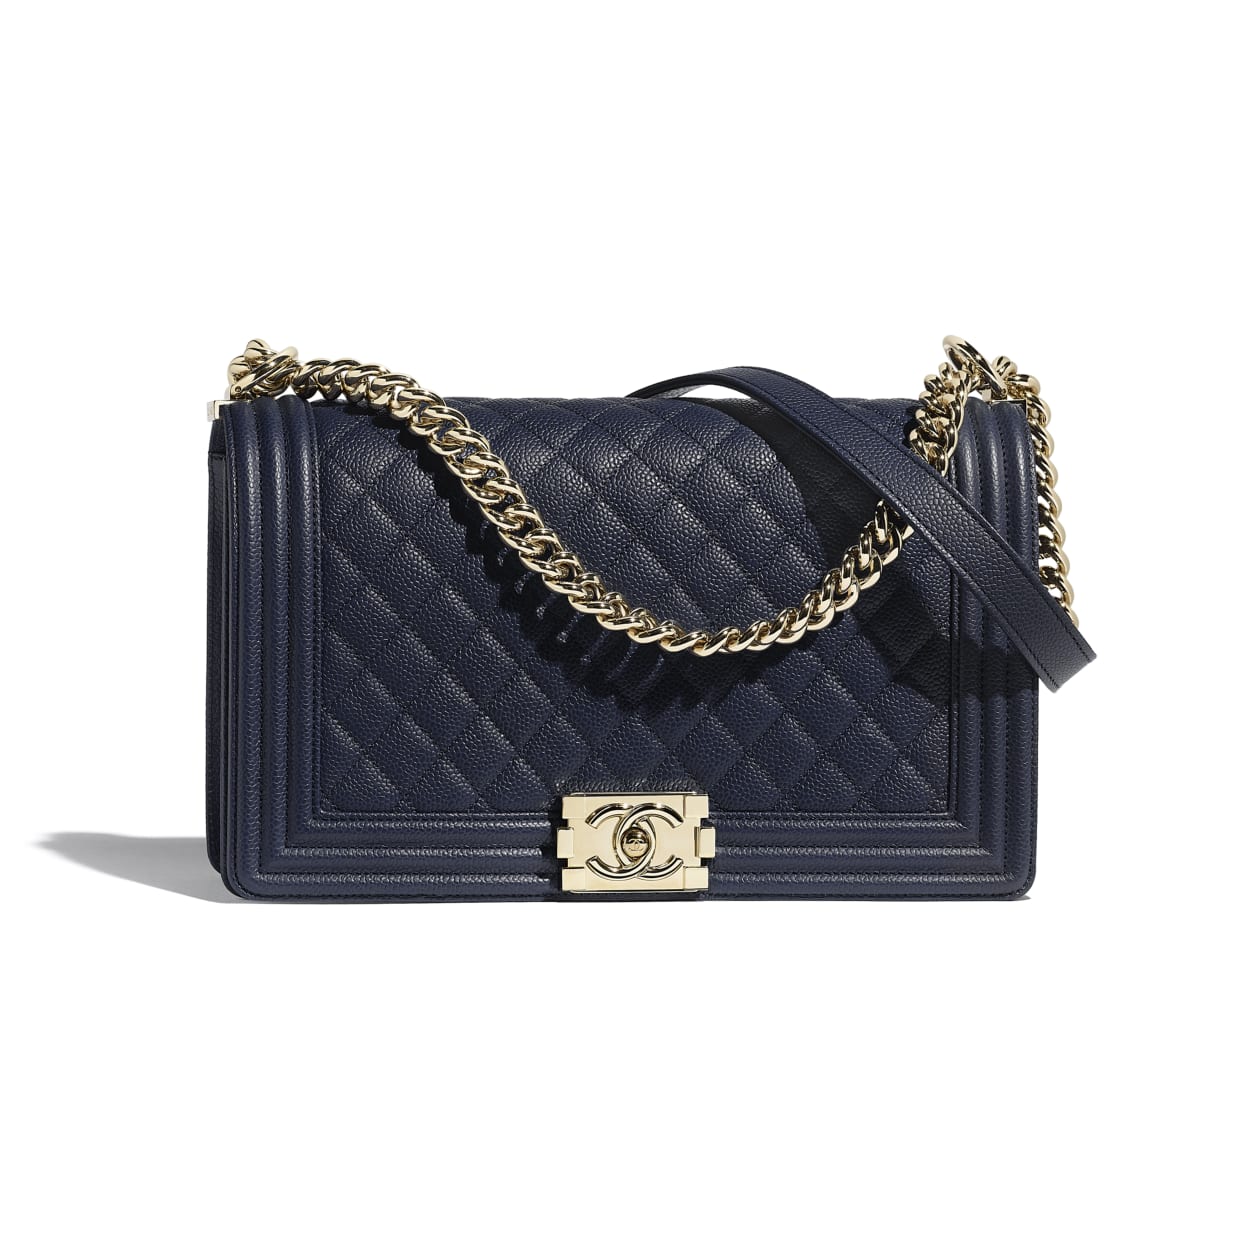 The price of this Chanel handbag just went up iconic bags now 5 to 17 per  cent more expensive